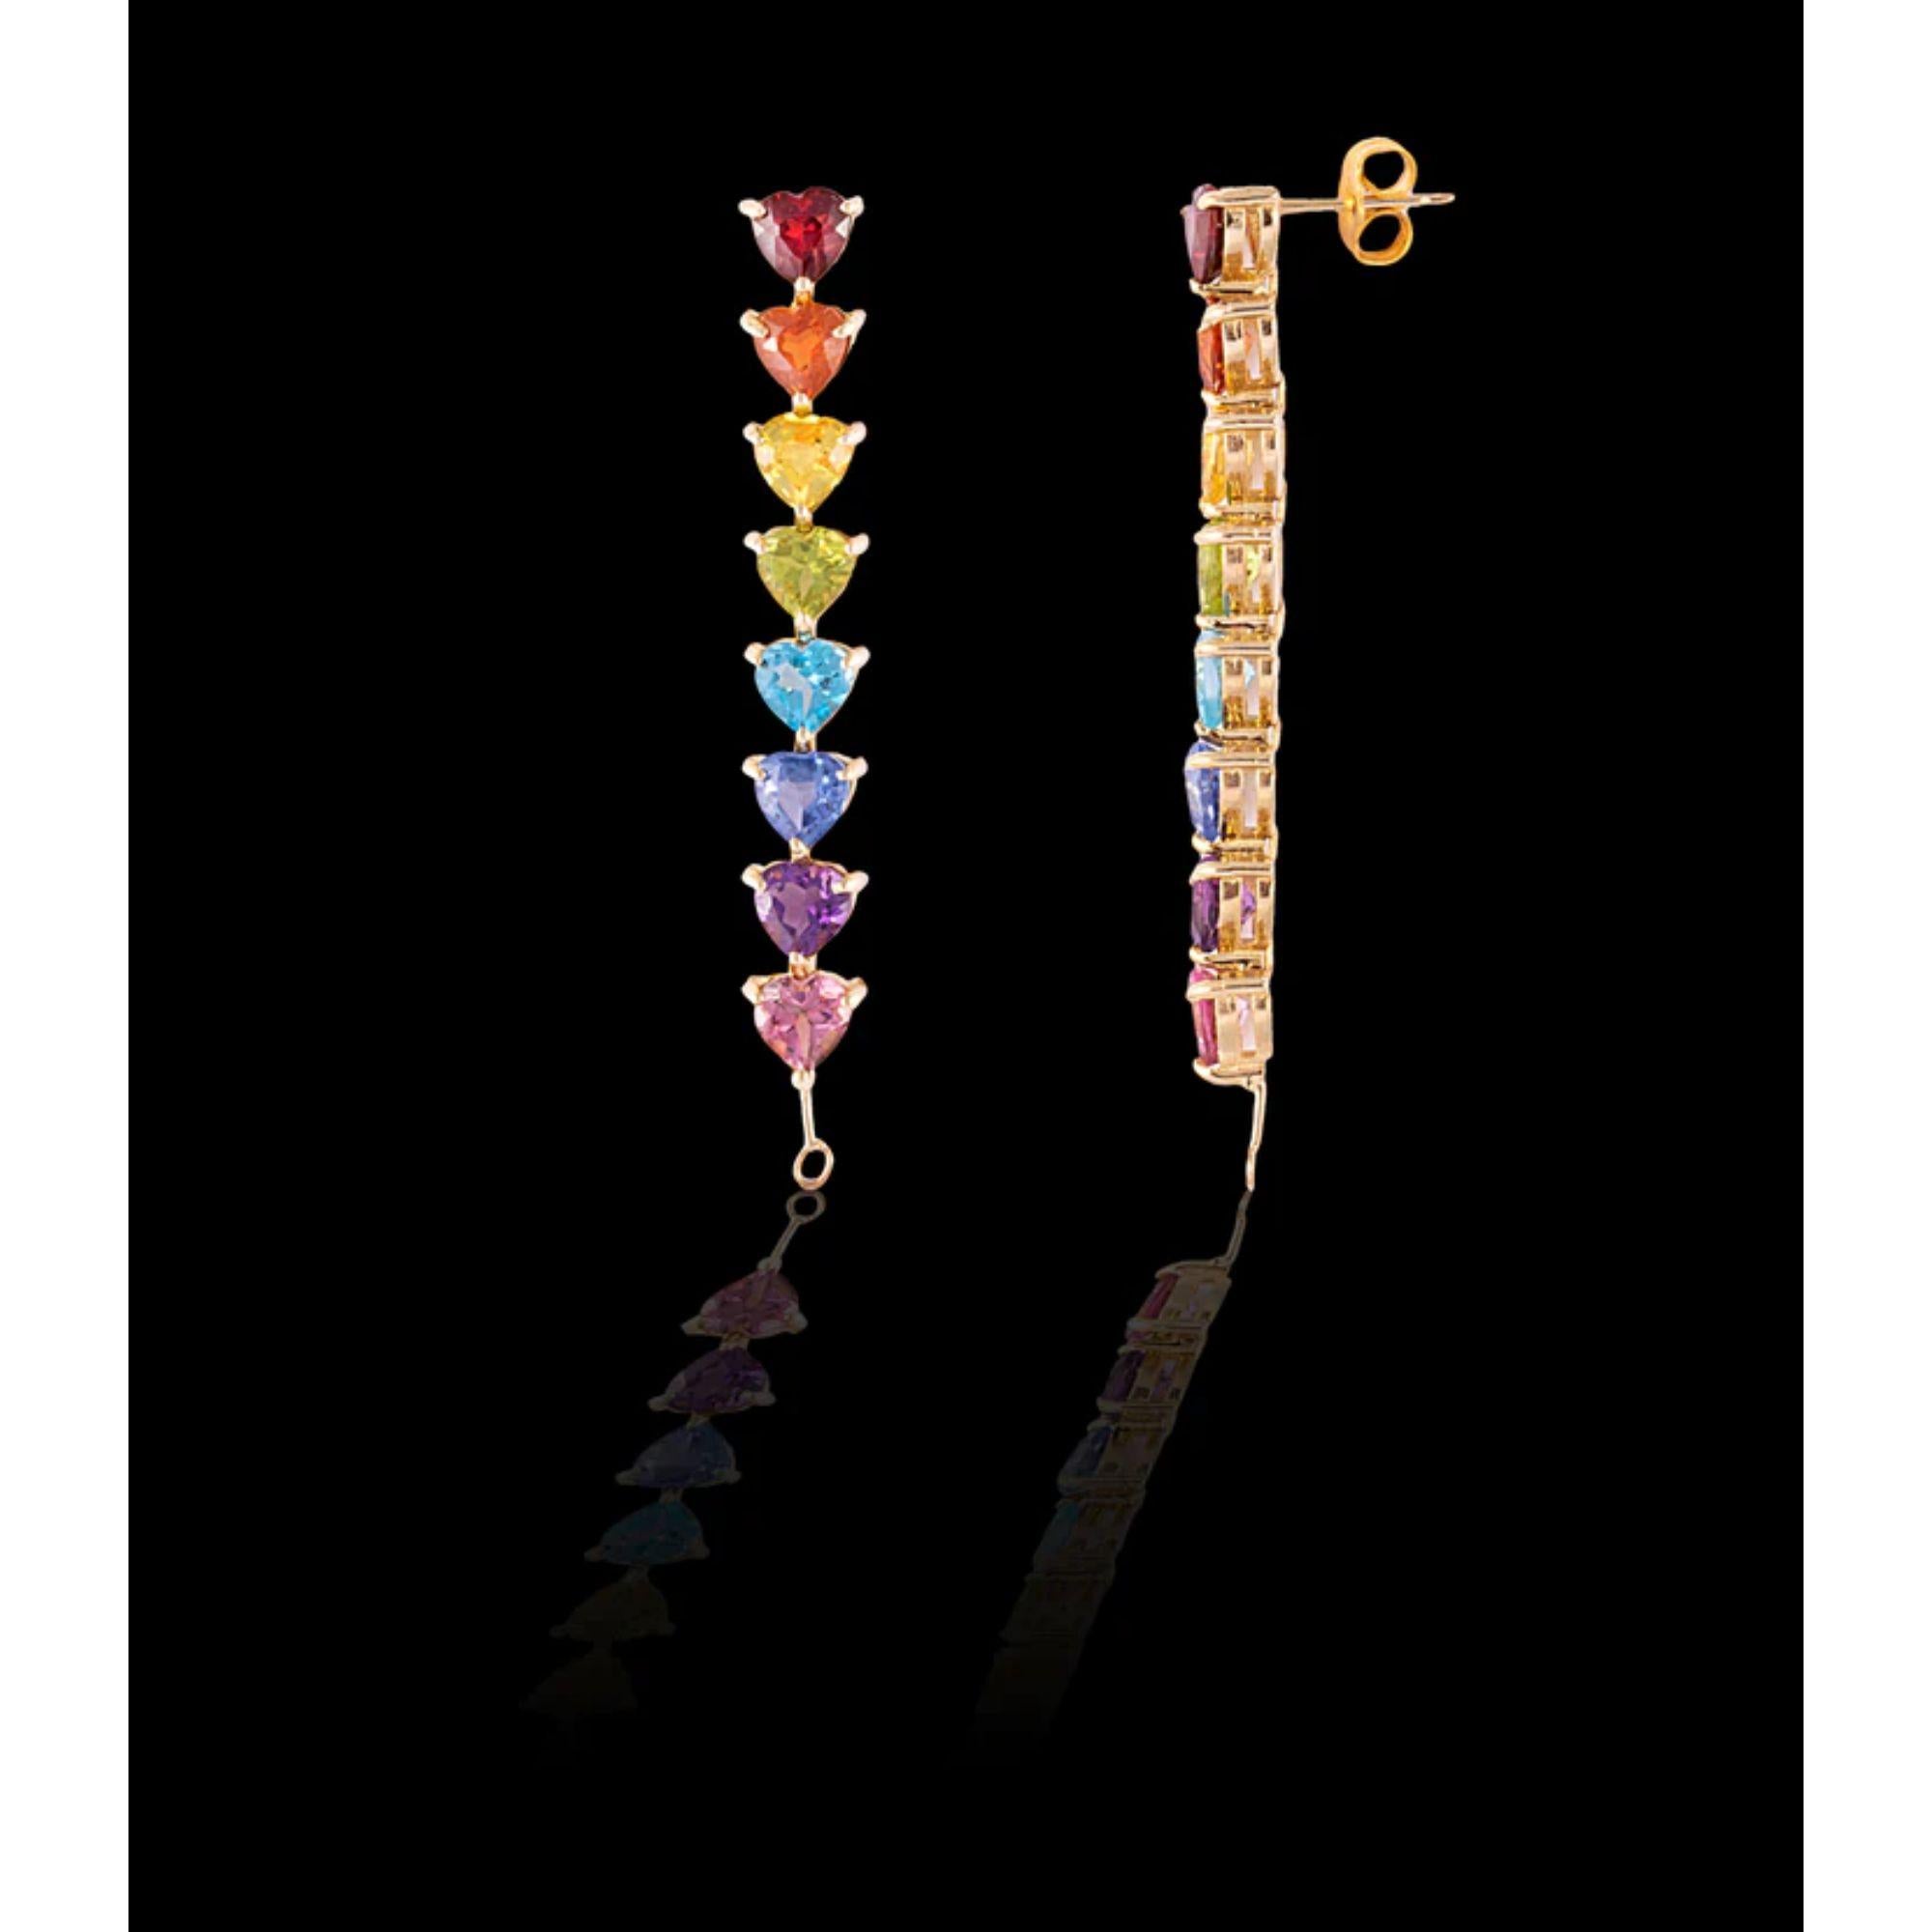 Drip in the full rainbow fantasy in the most unique and colorful drop earrings to light up your neck. These earrings are like no other and consists of heart settings with colored gems and sapphires in the Classic Mordekai rainbow pattern. Goes